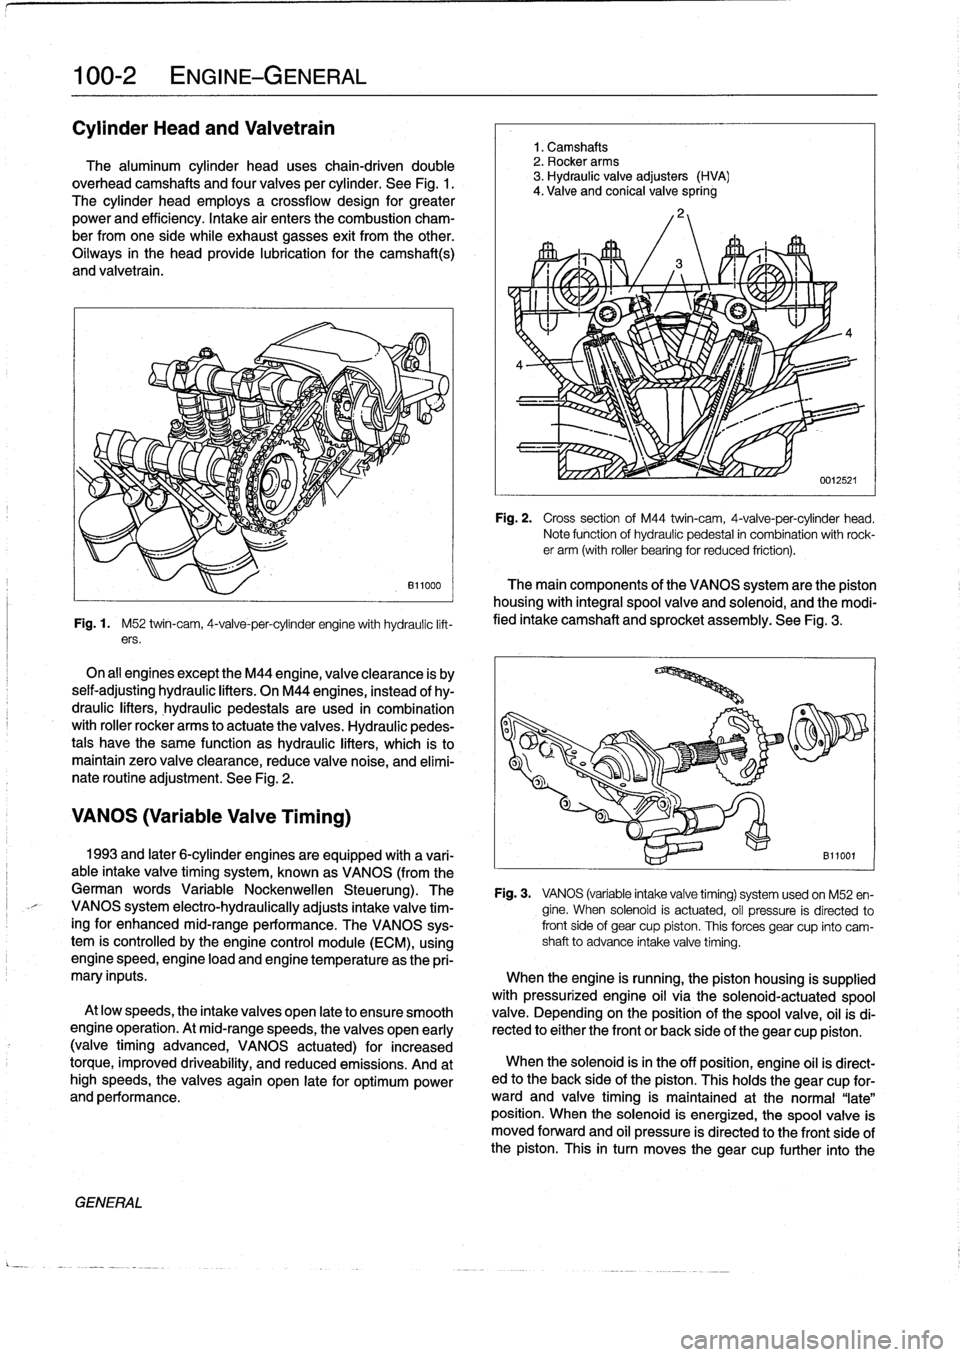 BMW 323i 1995 E36 Service Manual 
100-2
ENGINE-GENERAL

Cylinder
Head
and
Valvetrain

The
aluminum
cylinder
head
uses
chain-driven
double
overhead
camshafts
and
four
valves
per
cylinder
.
See
Fig
.
1
.

The
cylinder
head
employs
a
cr